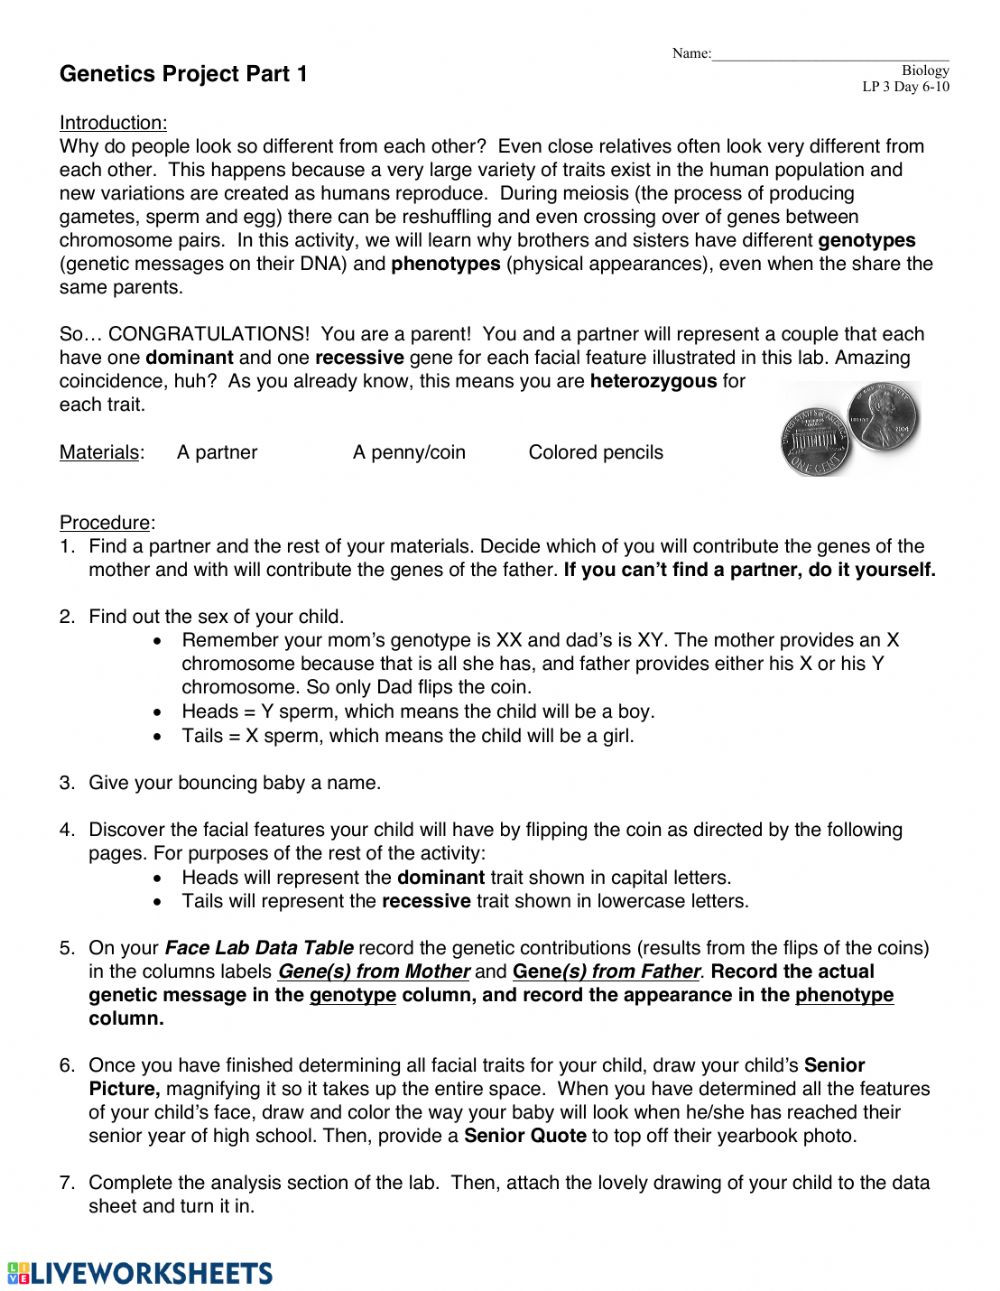 Genotypes And Phenotypes Worksheet Answers